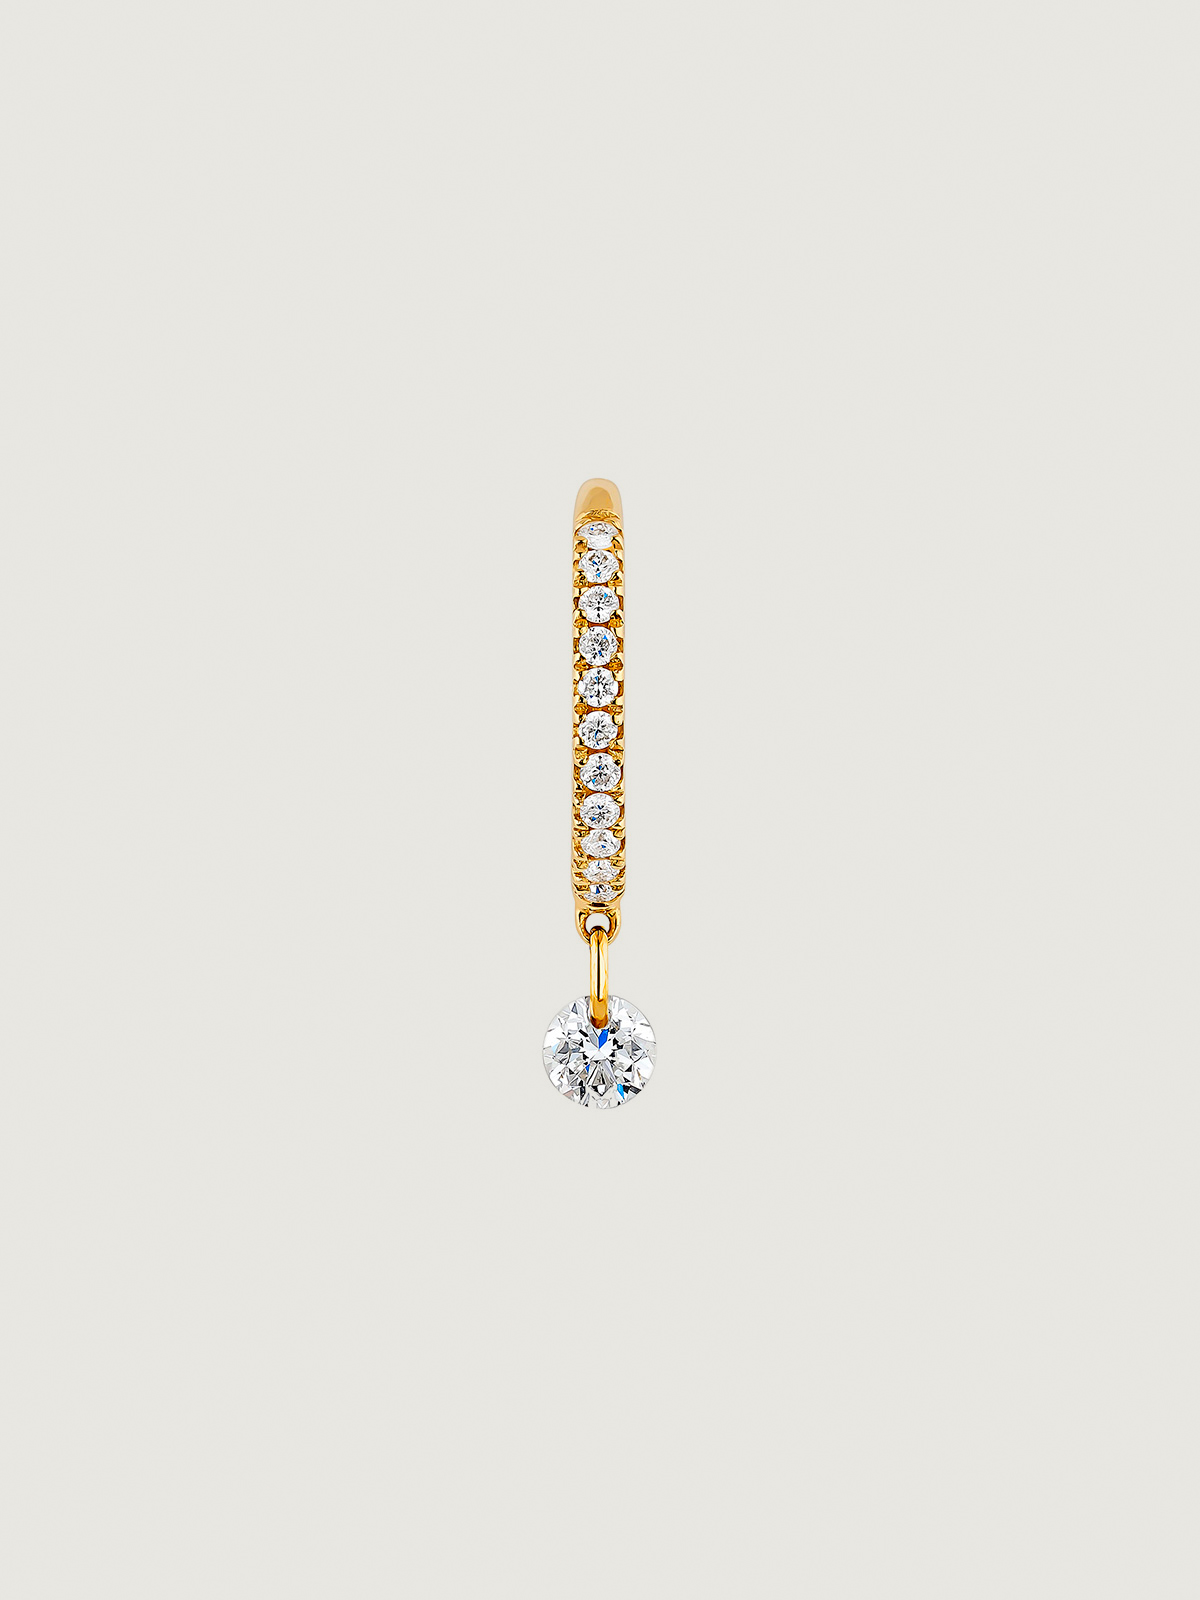 Individual small hoop earring of 18K yellow gold with diamonds.